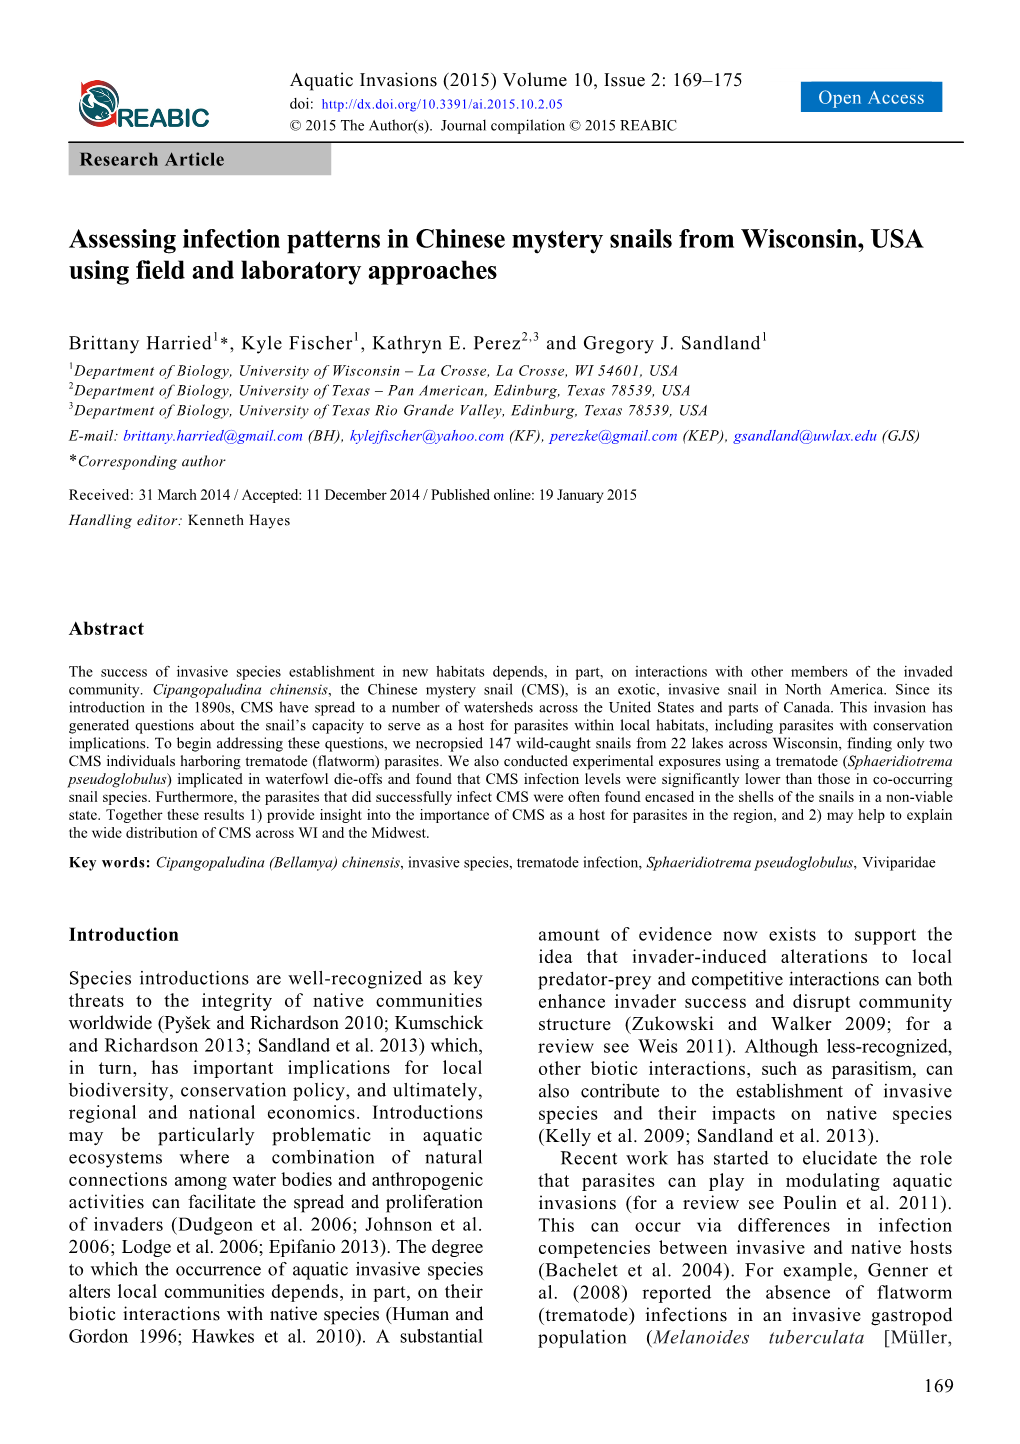 Assessing Infection Patterns in Chinese Mystery Snails from Wisconsin, USA Using Field and Laboratory Approaches